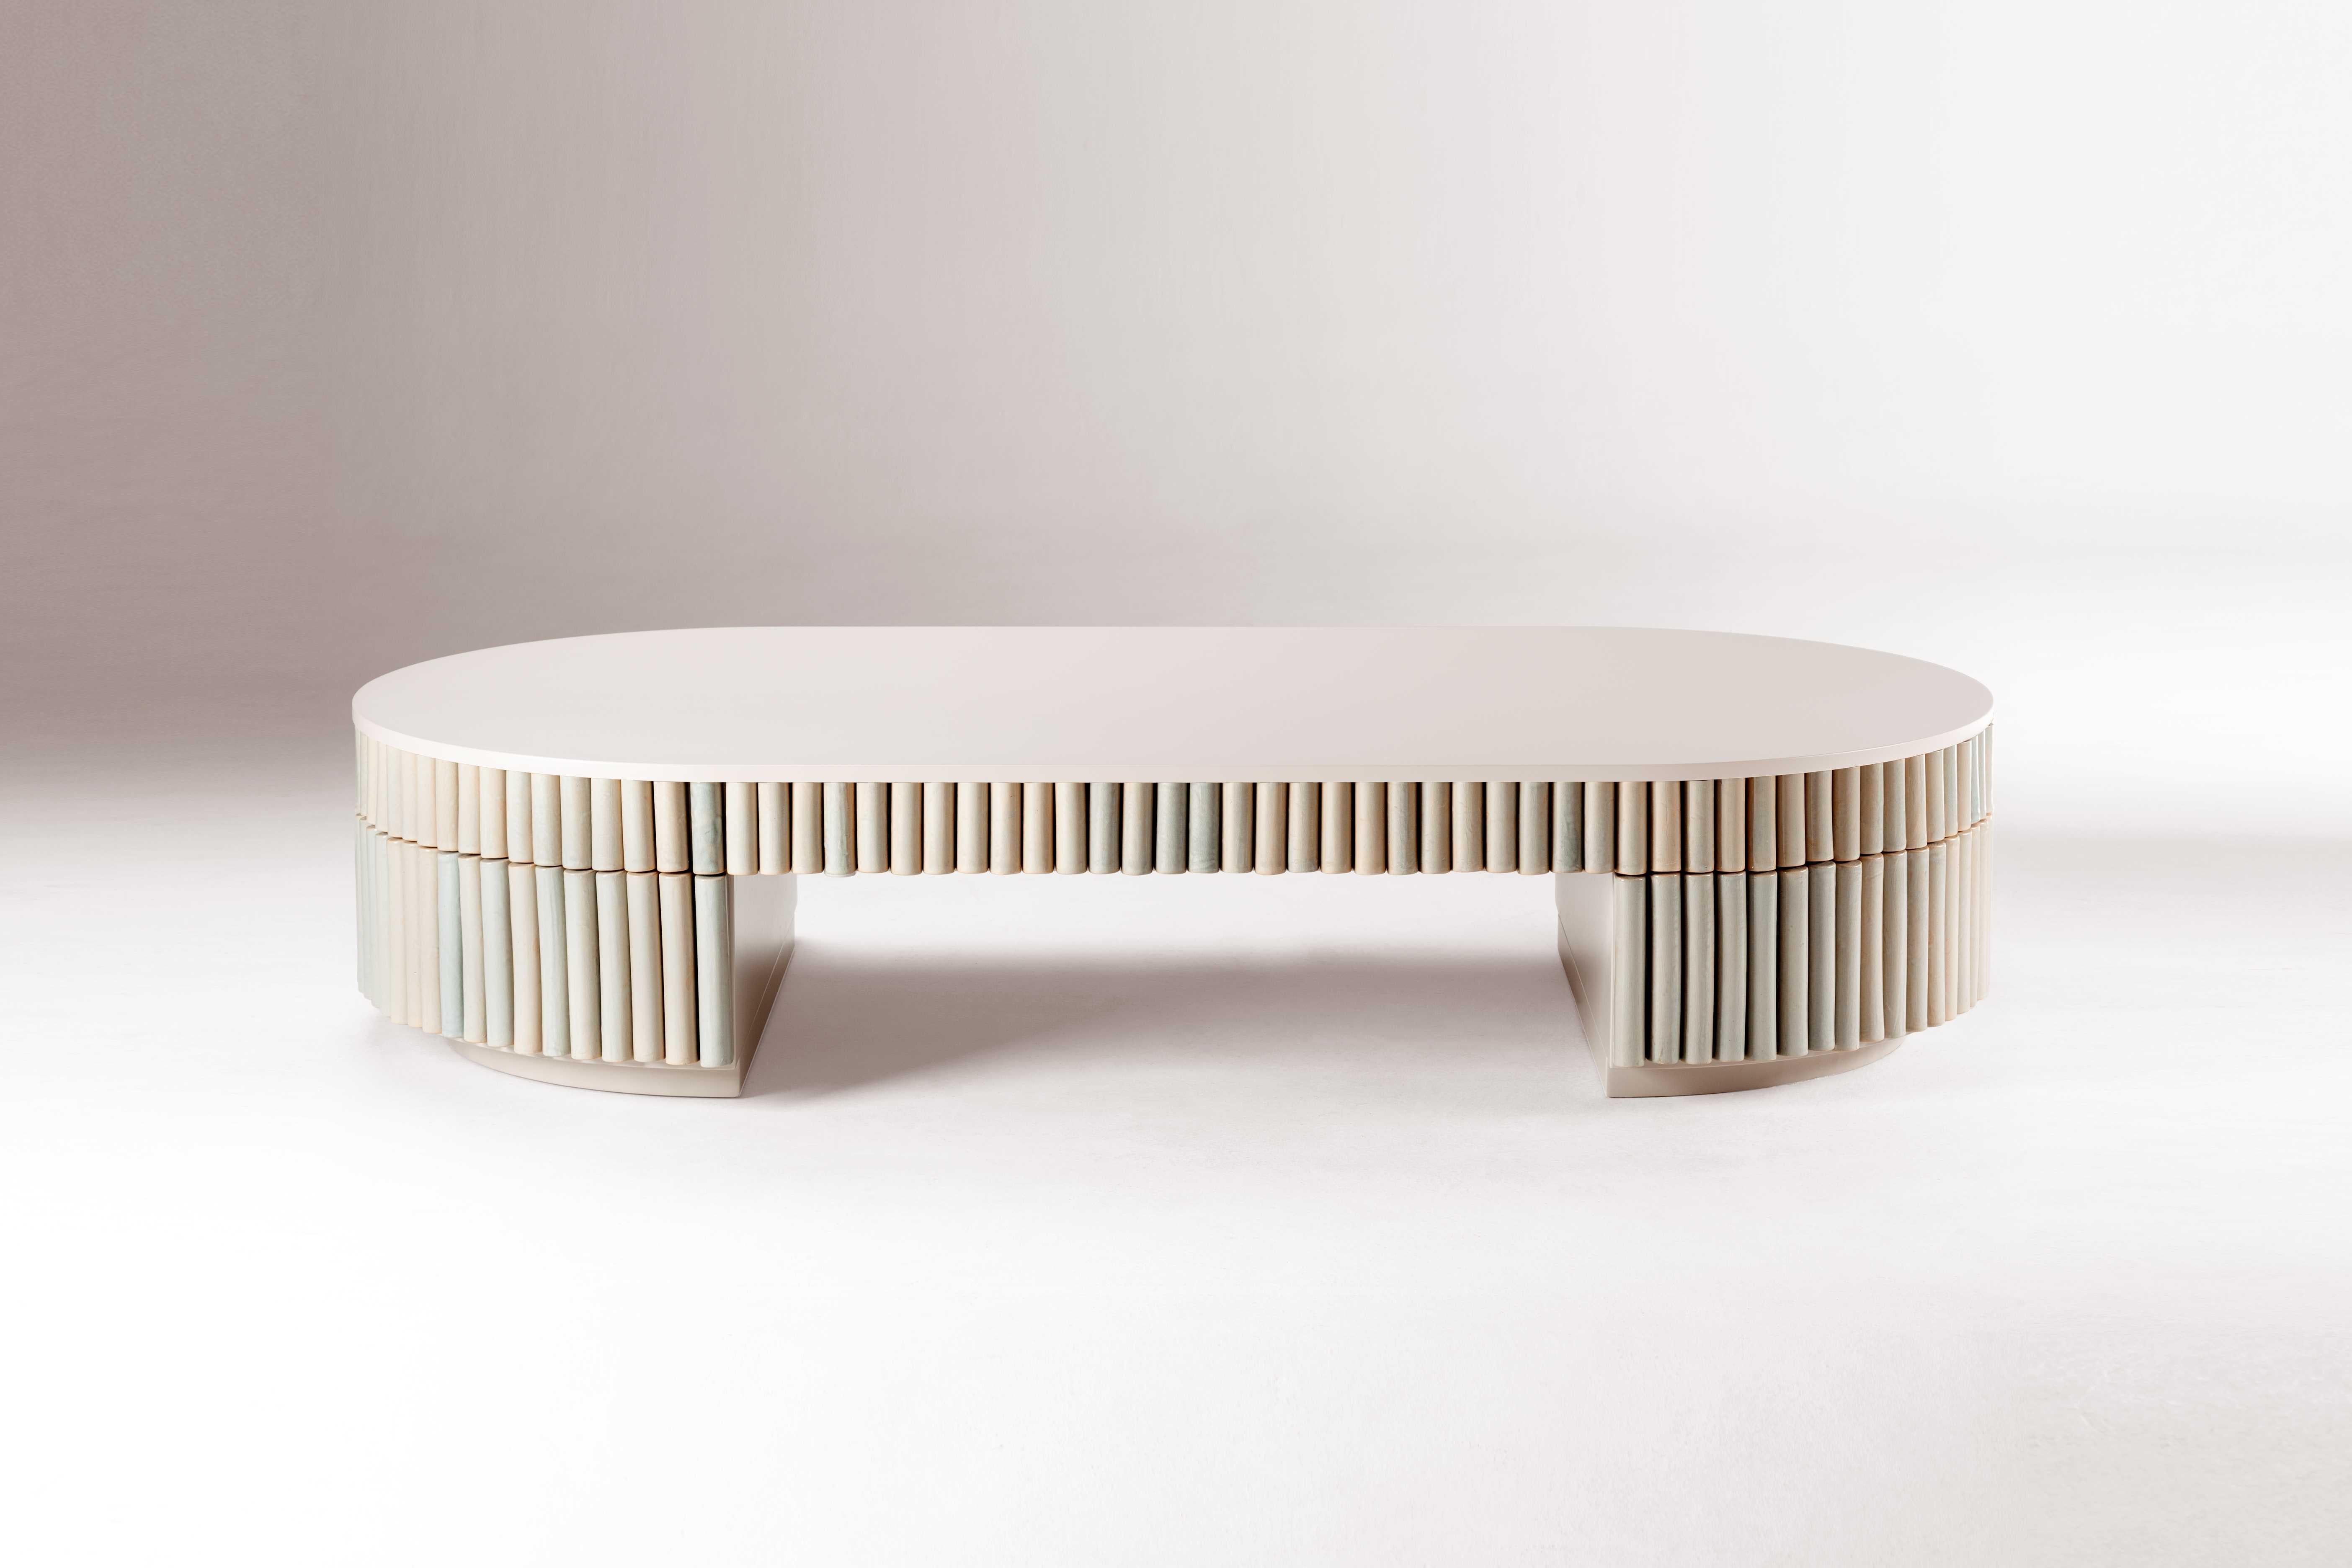 Exceptional in its craftwork, Nouvelle Vague is a center table that rejects traditional conventions in favor of experimentation. Round ceramic handmade pieces, painted in a unique craquele glaze are placed around a lacquered center top, creating a